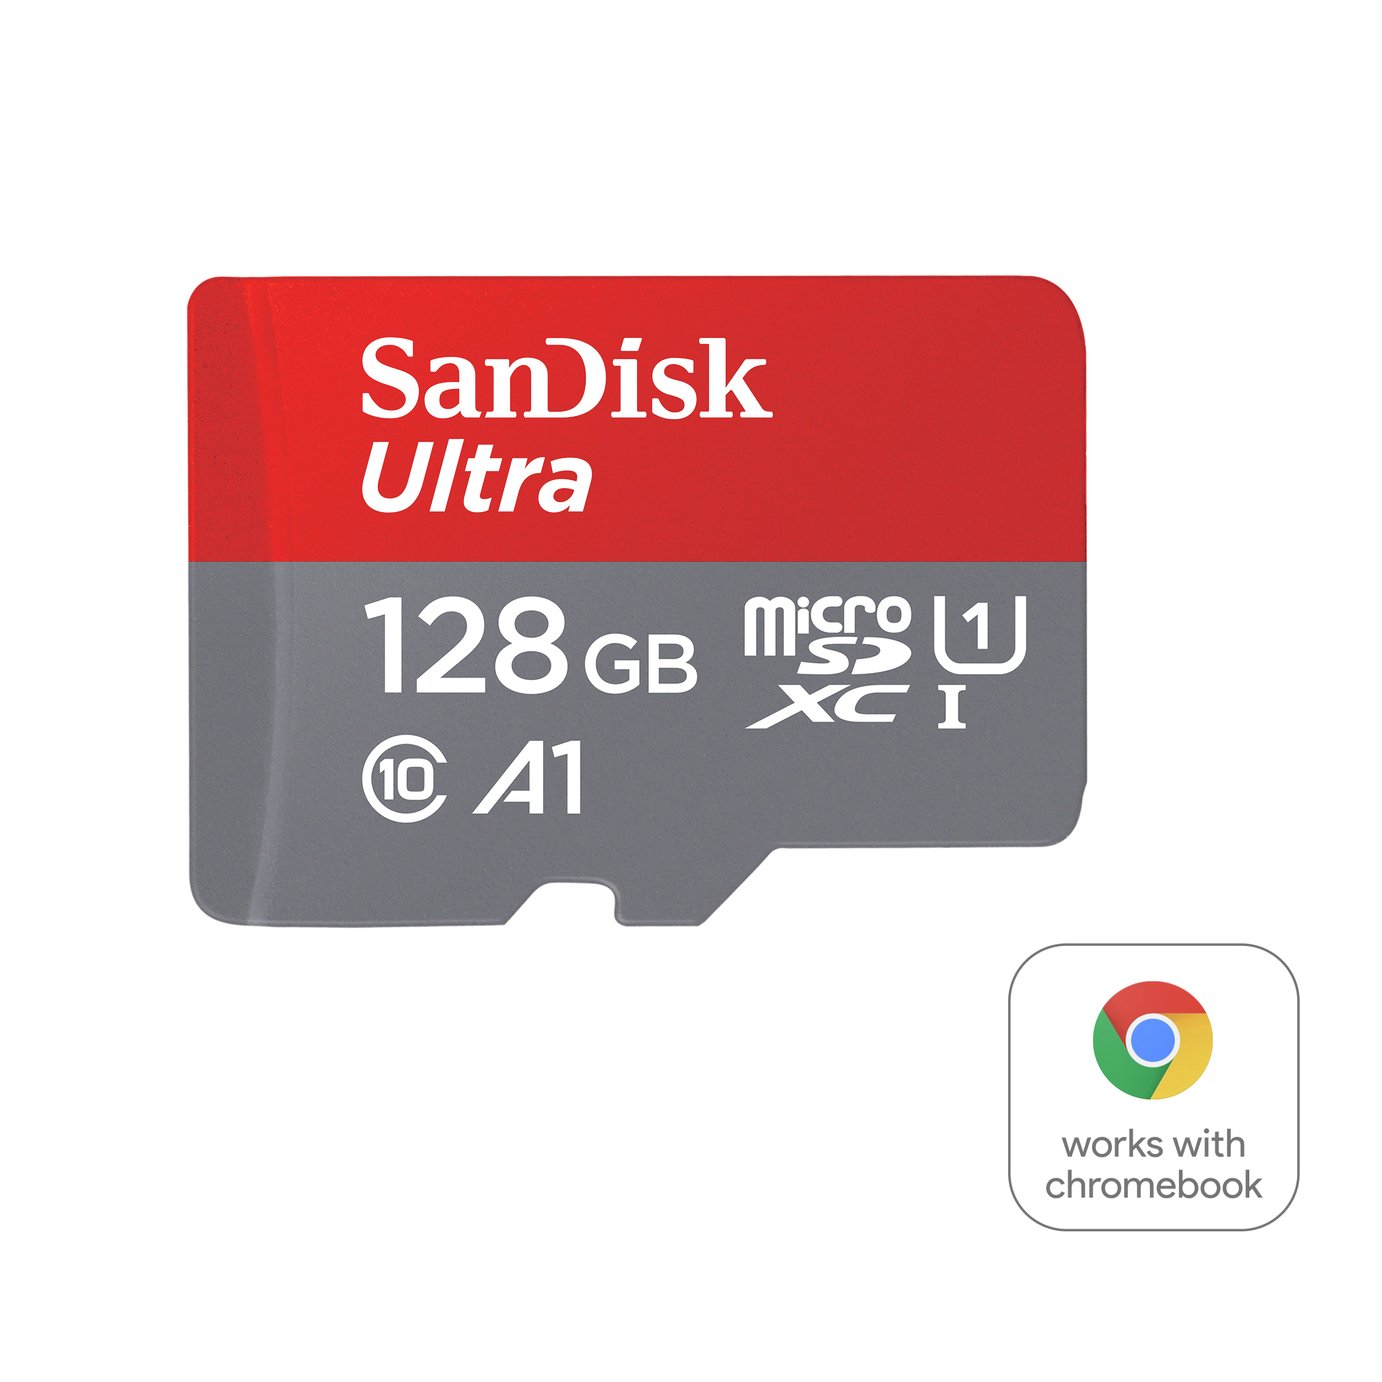 SanDisk Ultra 80MBs Micro SD Memory Card Review